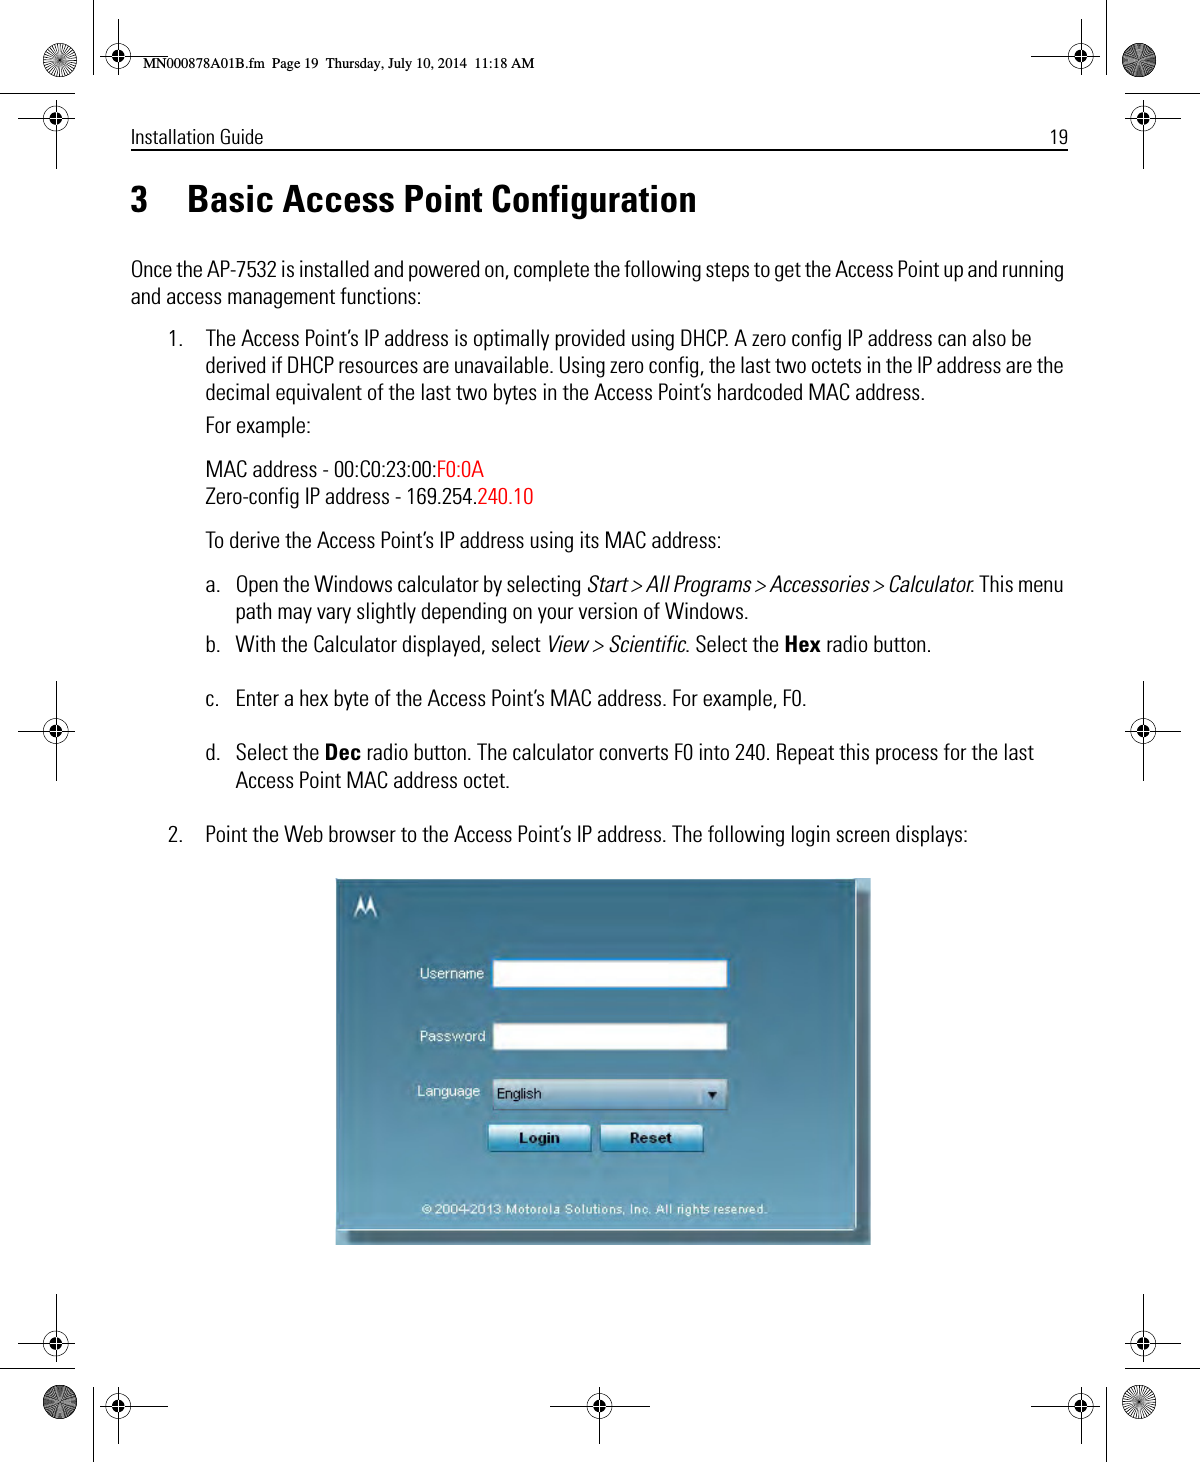 Installation Guide 193 Basic Access Point ConfigurationOnce the AP-7532 is installed and powered on, complete the following steps to get the Access Point up and running and access management functions:1. The Access Point’s IP address is optimally provided using DHCP. A zero config IP address can also be derived if DHCP resources are unavailable. Using zero config, the last two octets in the IP address are the decimal equivalent of the last two bytes in the Access Point’s hardcoded MAC address.For example:MAC address - 00:C0:23:00:F0:0A Zero-config IP address - 169.254.240.10To derive the Access Point’s IP address using its MAC address:a. Open the Windows calculator by selecting Start &gt; All Programs &gt; Accessories &gt; Calculator. This menu path may vary slightly depending on your version of Windows.b. With the Calculator displayed, select View &gt; Scientific. Select the Hex radio button.c. Enter a hex byte of the Access Point’s MAC address. For example, F0.d. Select the Dec radio button. The calculator converts F0 into 240. Repeat this process for the last Access Point MAC address octet.2. Point the Web browser to the Access Point’s IP address. The following login screen displays:MN000878A01B.fm  Page 19  Thursday, July 10, 2014  11:18 AM